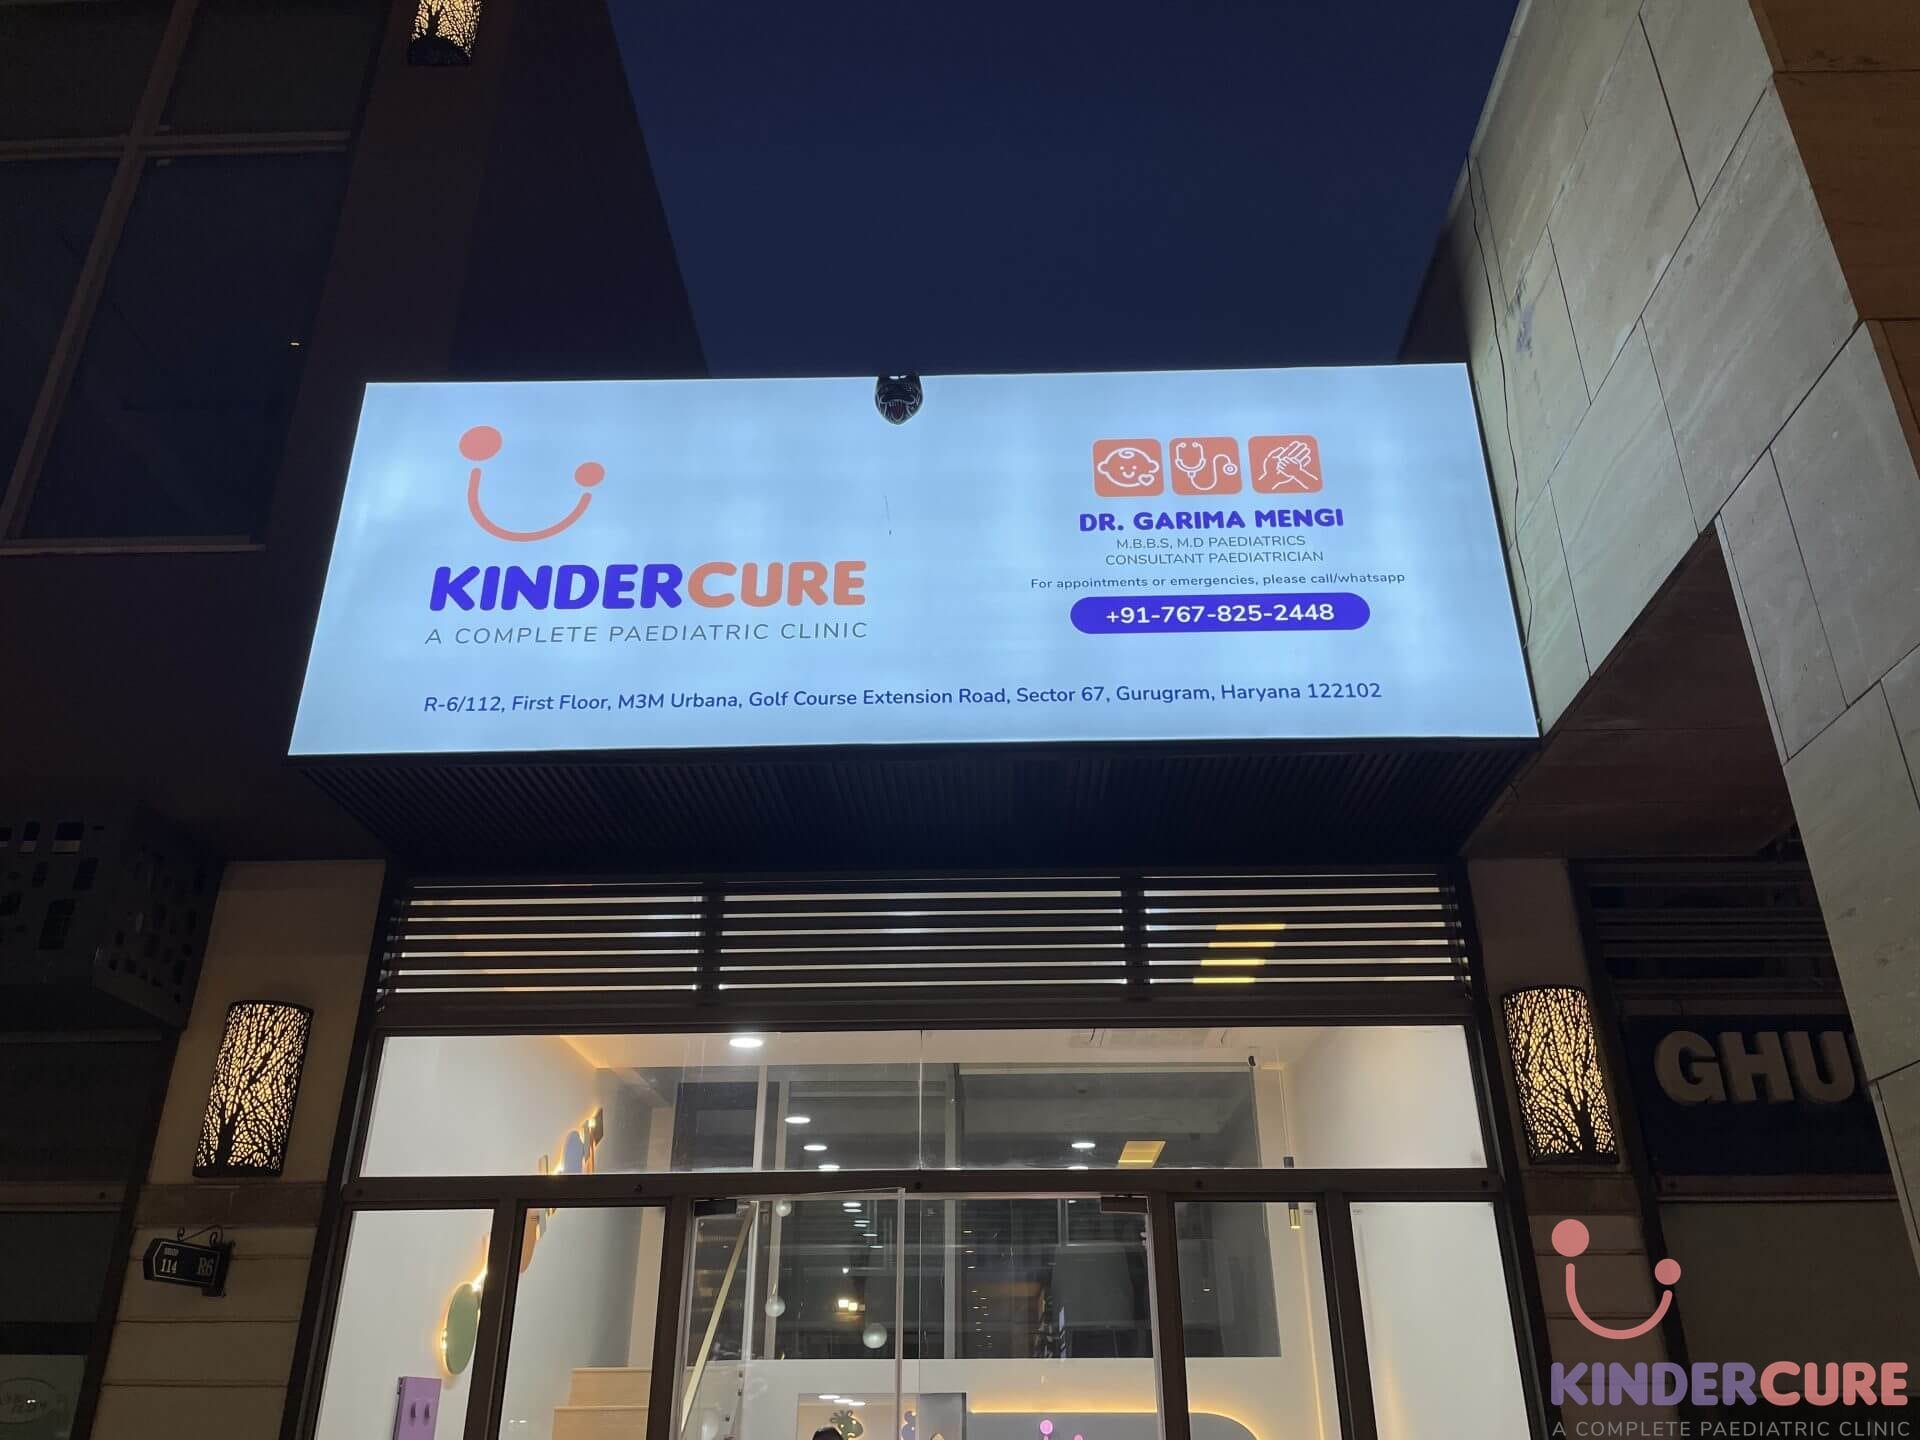 Exterior view of KinderCure Paediatric Clinic, Gurgaon, showcasing the clinic's board